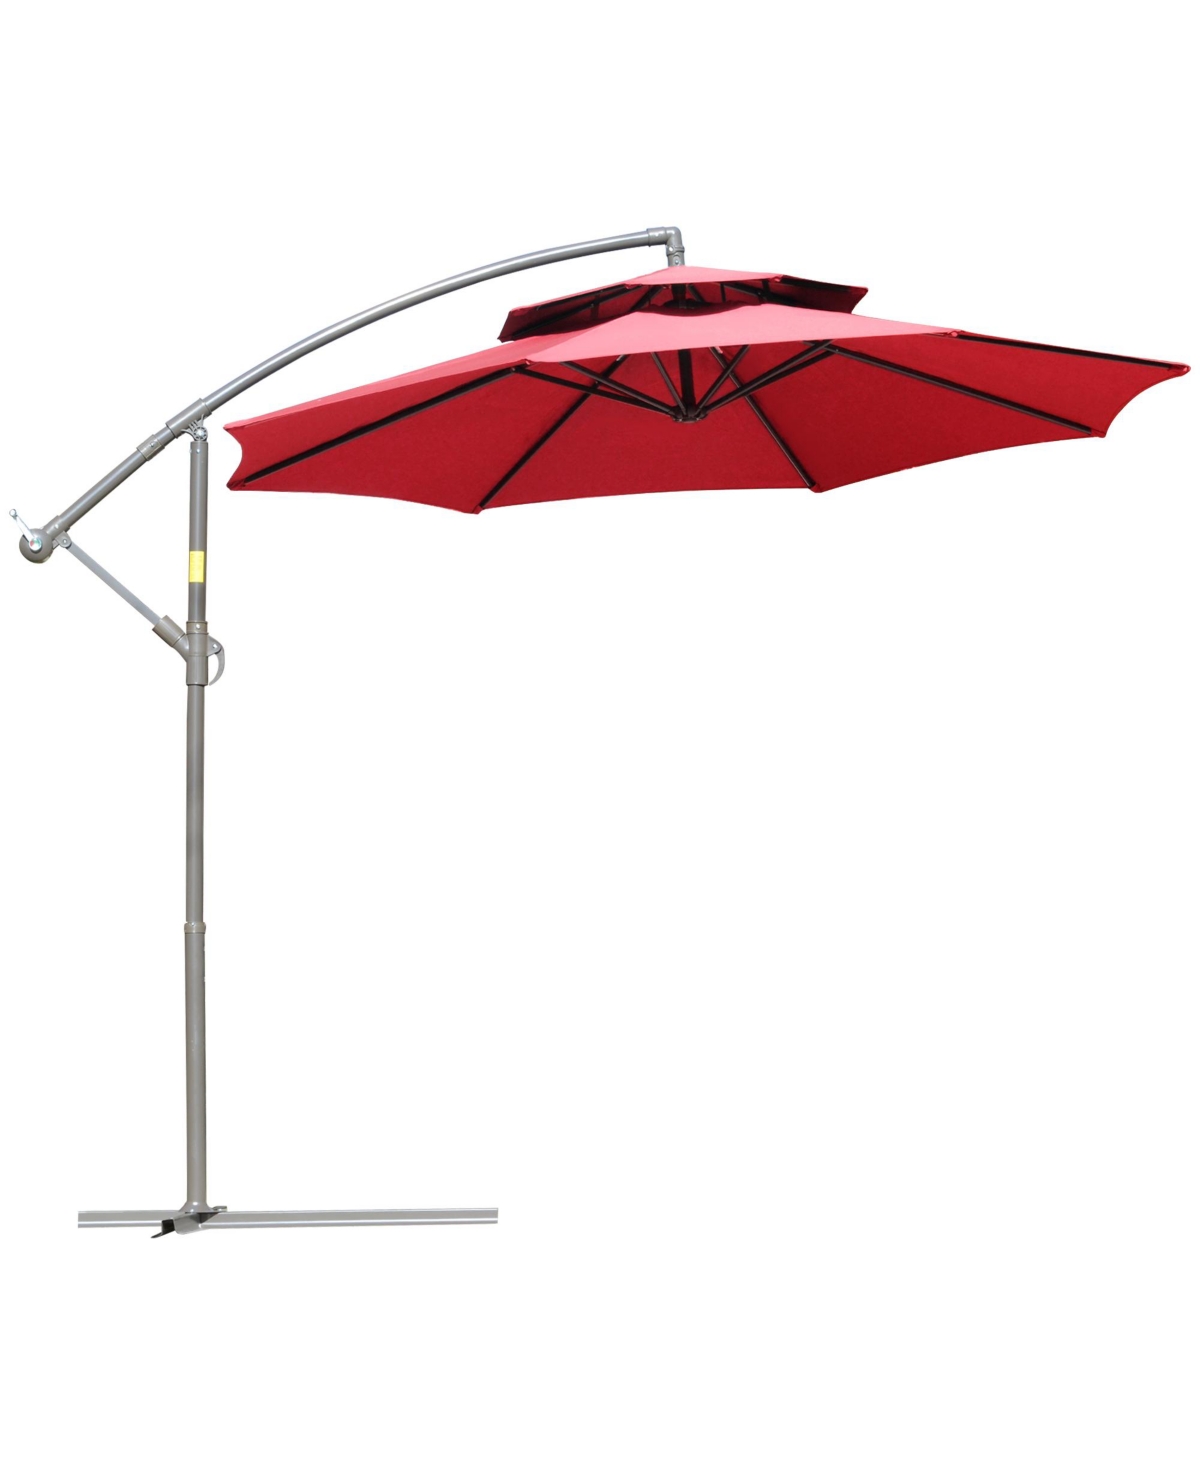 9' 2-Tier Cantilever Umbrella with Crank Handle, Cross Base and 8 Ribs, Garden Patio Umbrella for Backyard, Poolside, and Lawn, Red - Red